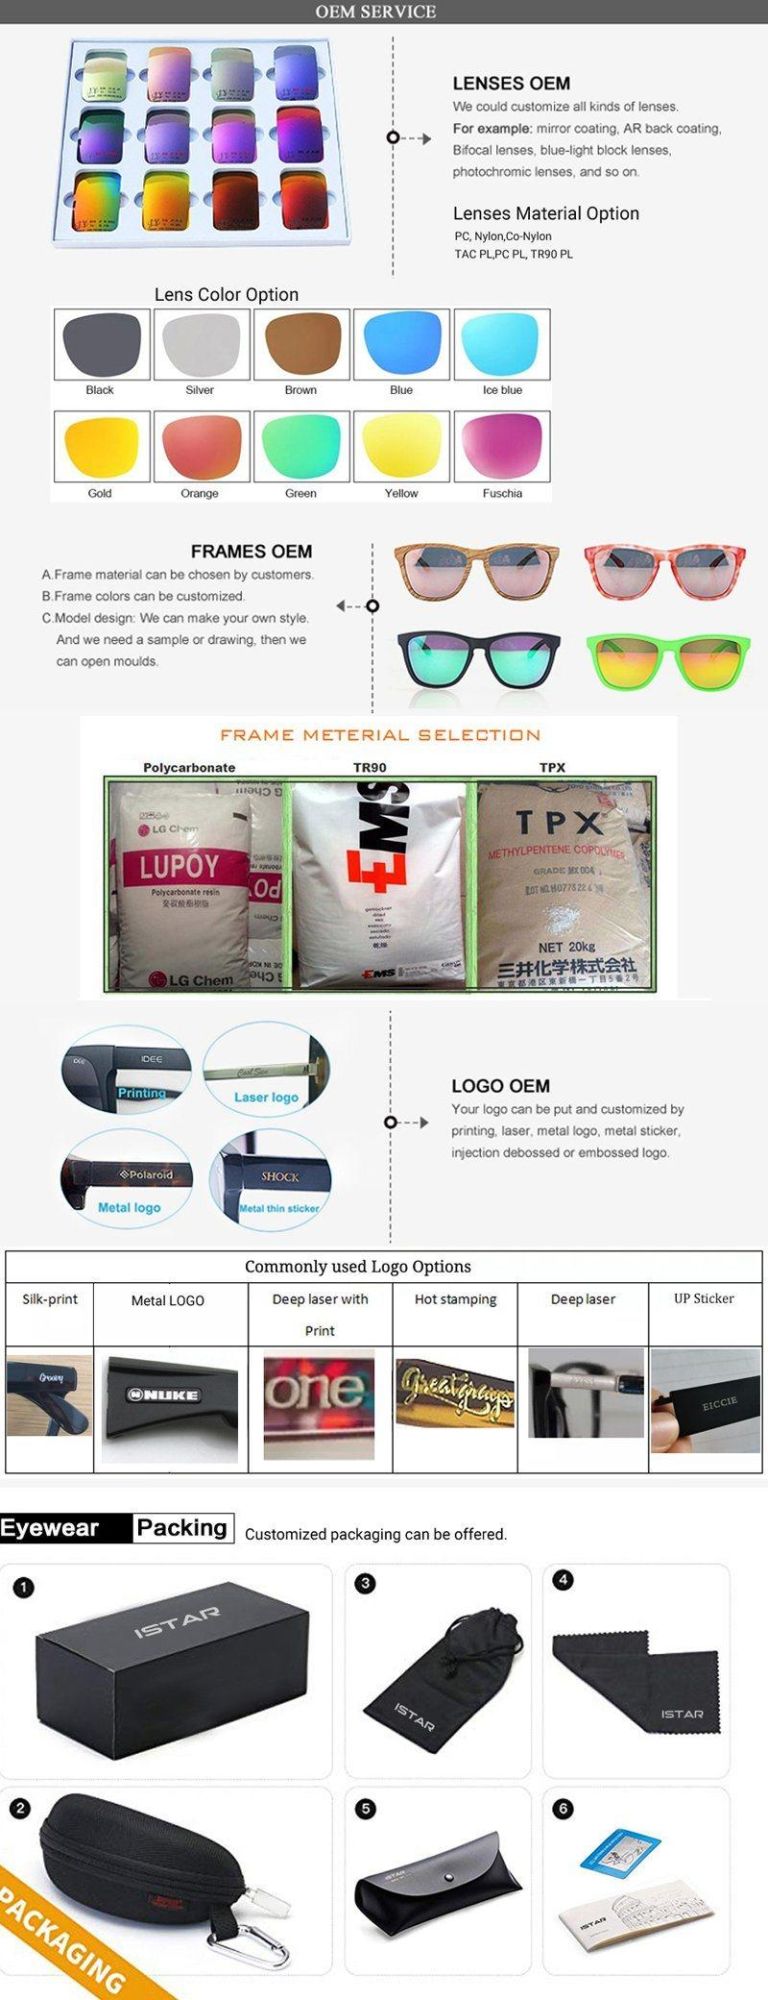 New Style Customized Transparent Silicone Nose Pad Plastic Mens Sunglasses